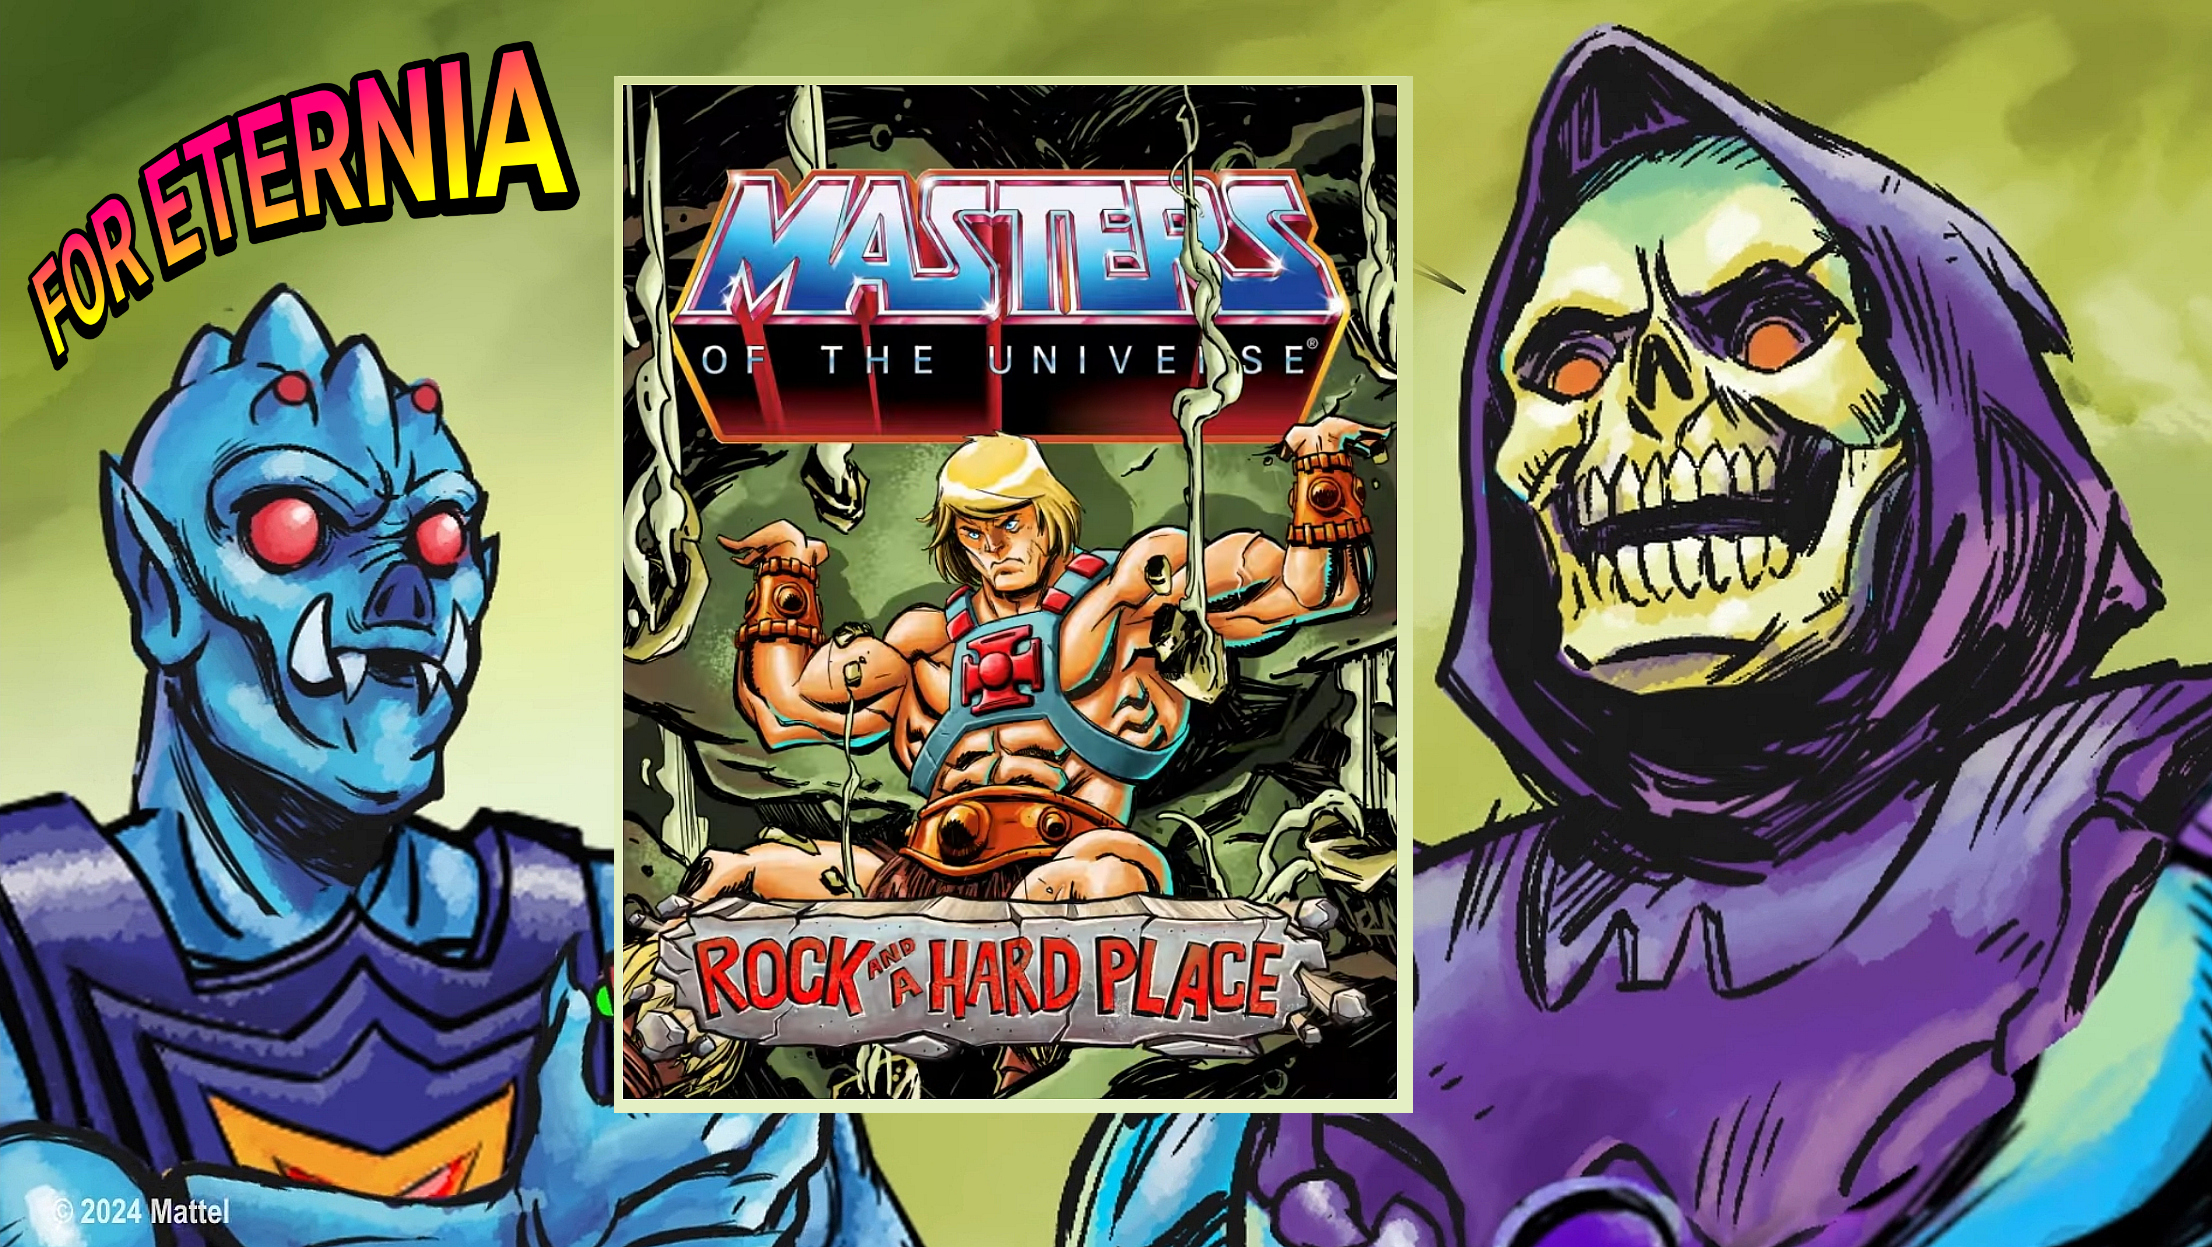 Mattel releases their seventh animated Masters of the Universe Origins MiniComic titled ”Rock and a Hard Place”